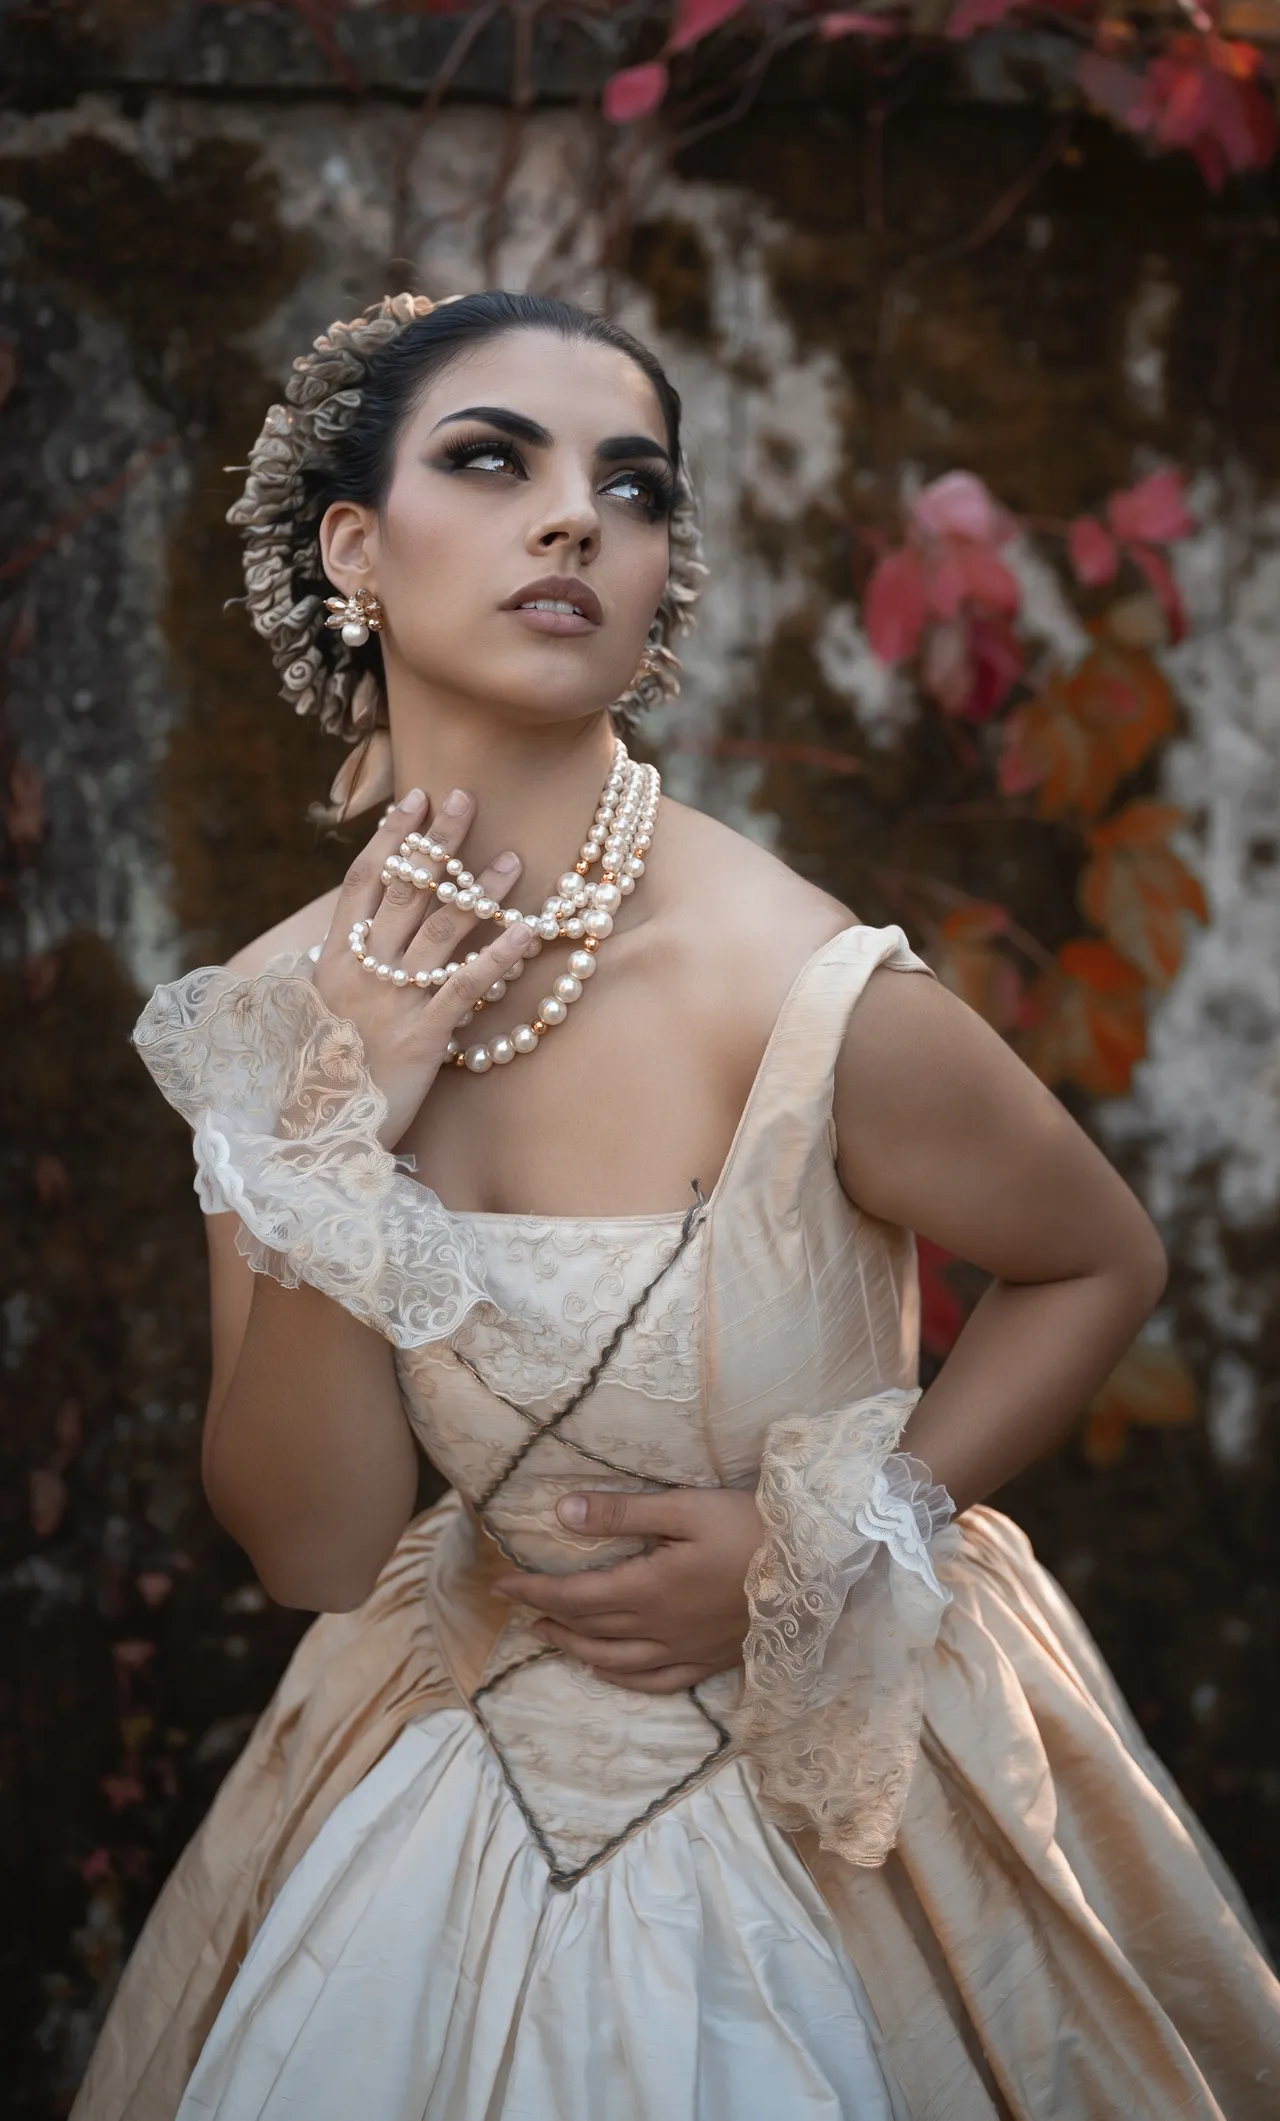 Woman in ivory elizabethan gown wearing 3 pearl necklaces. her Hand is underneath the necklaces holding them away from her neck